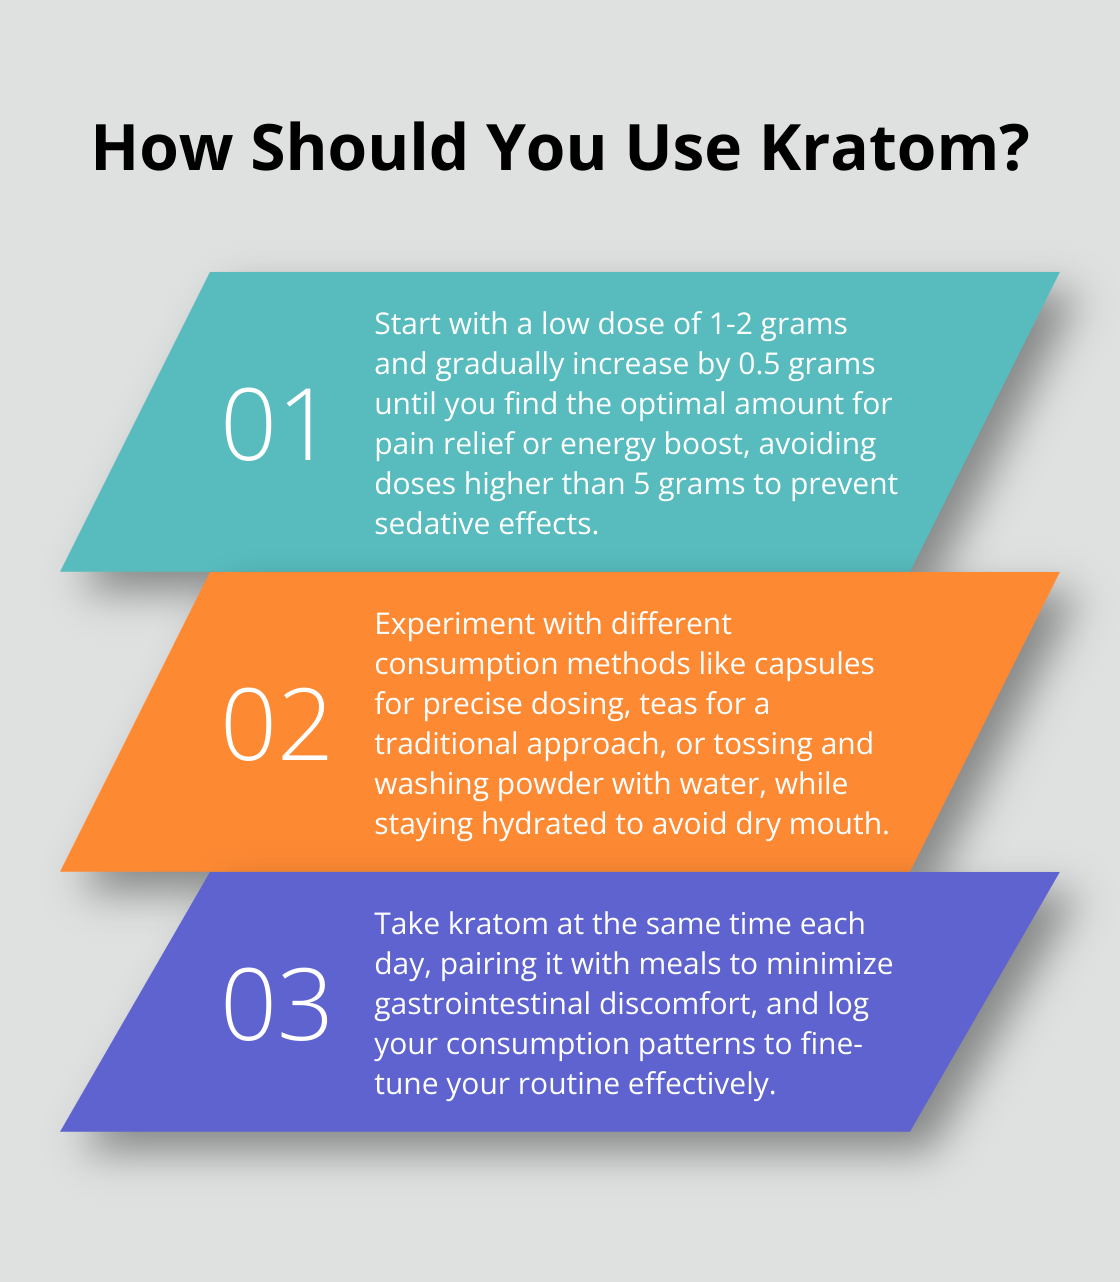 Fact - How Should You Use Kratom?